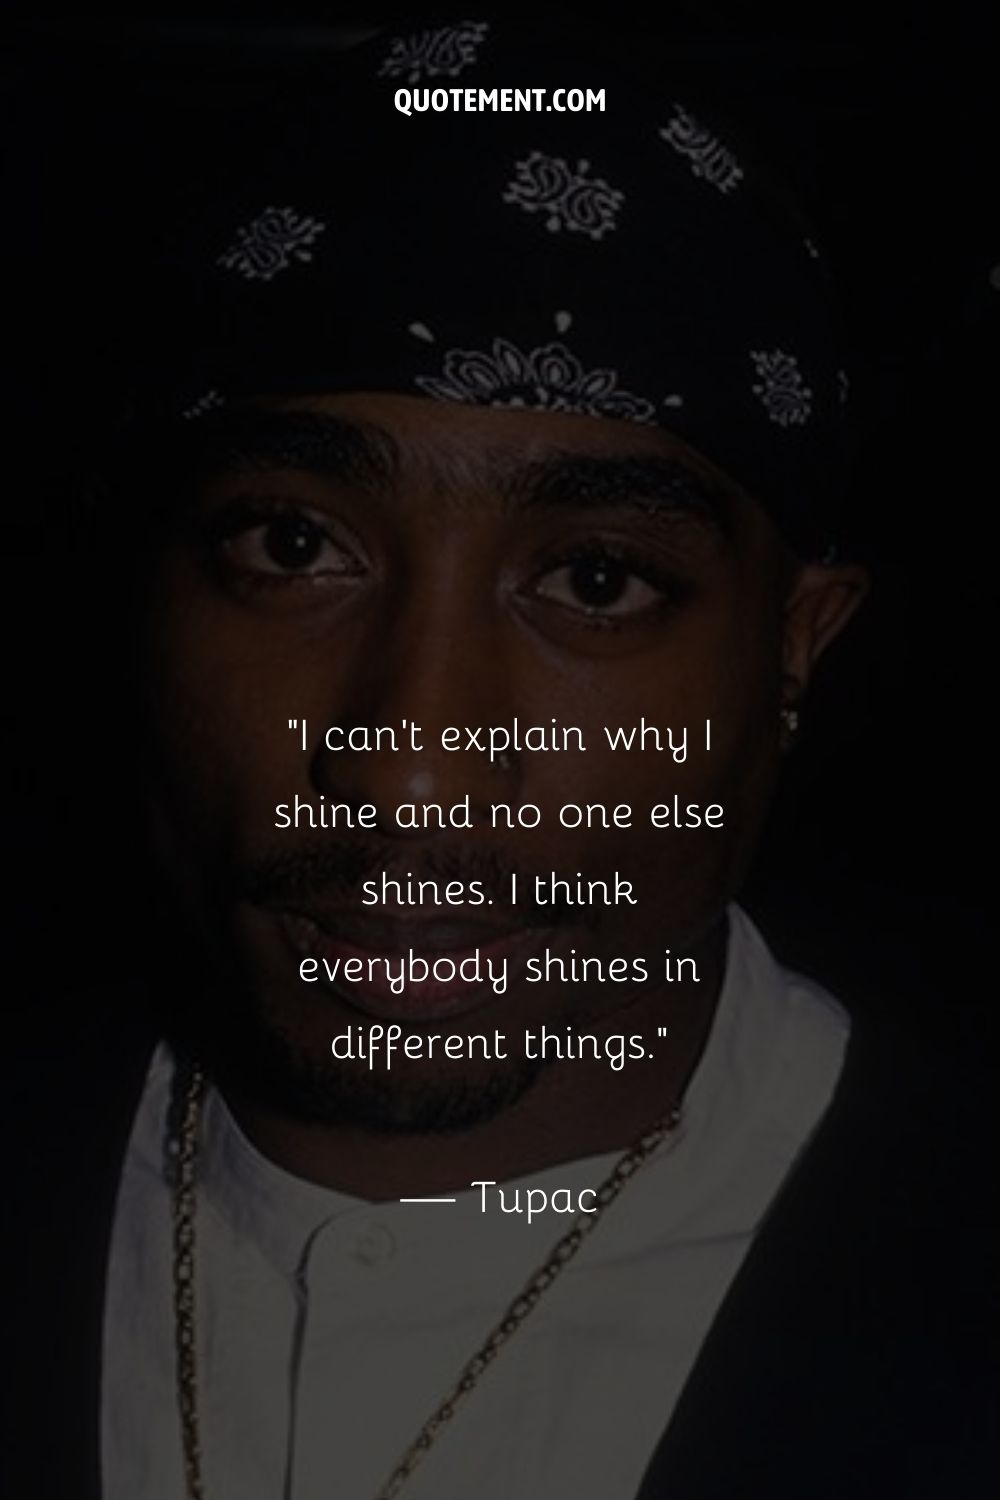 Famous Tupac quote to inspire you.